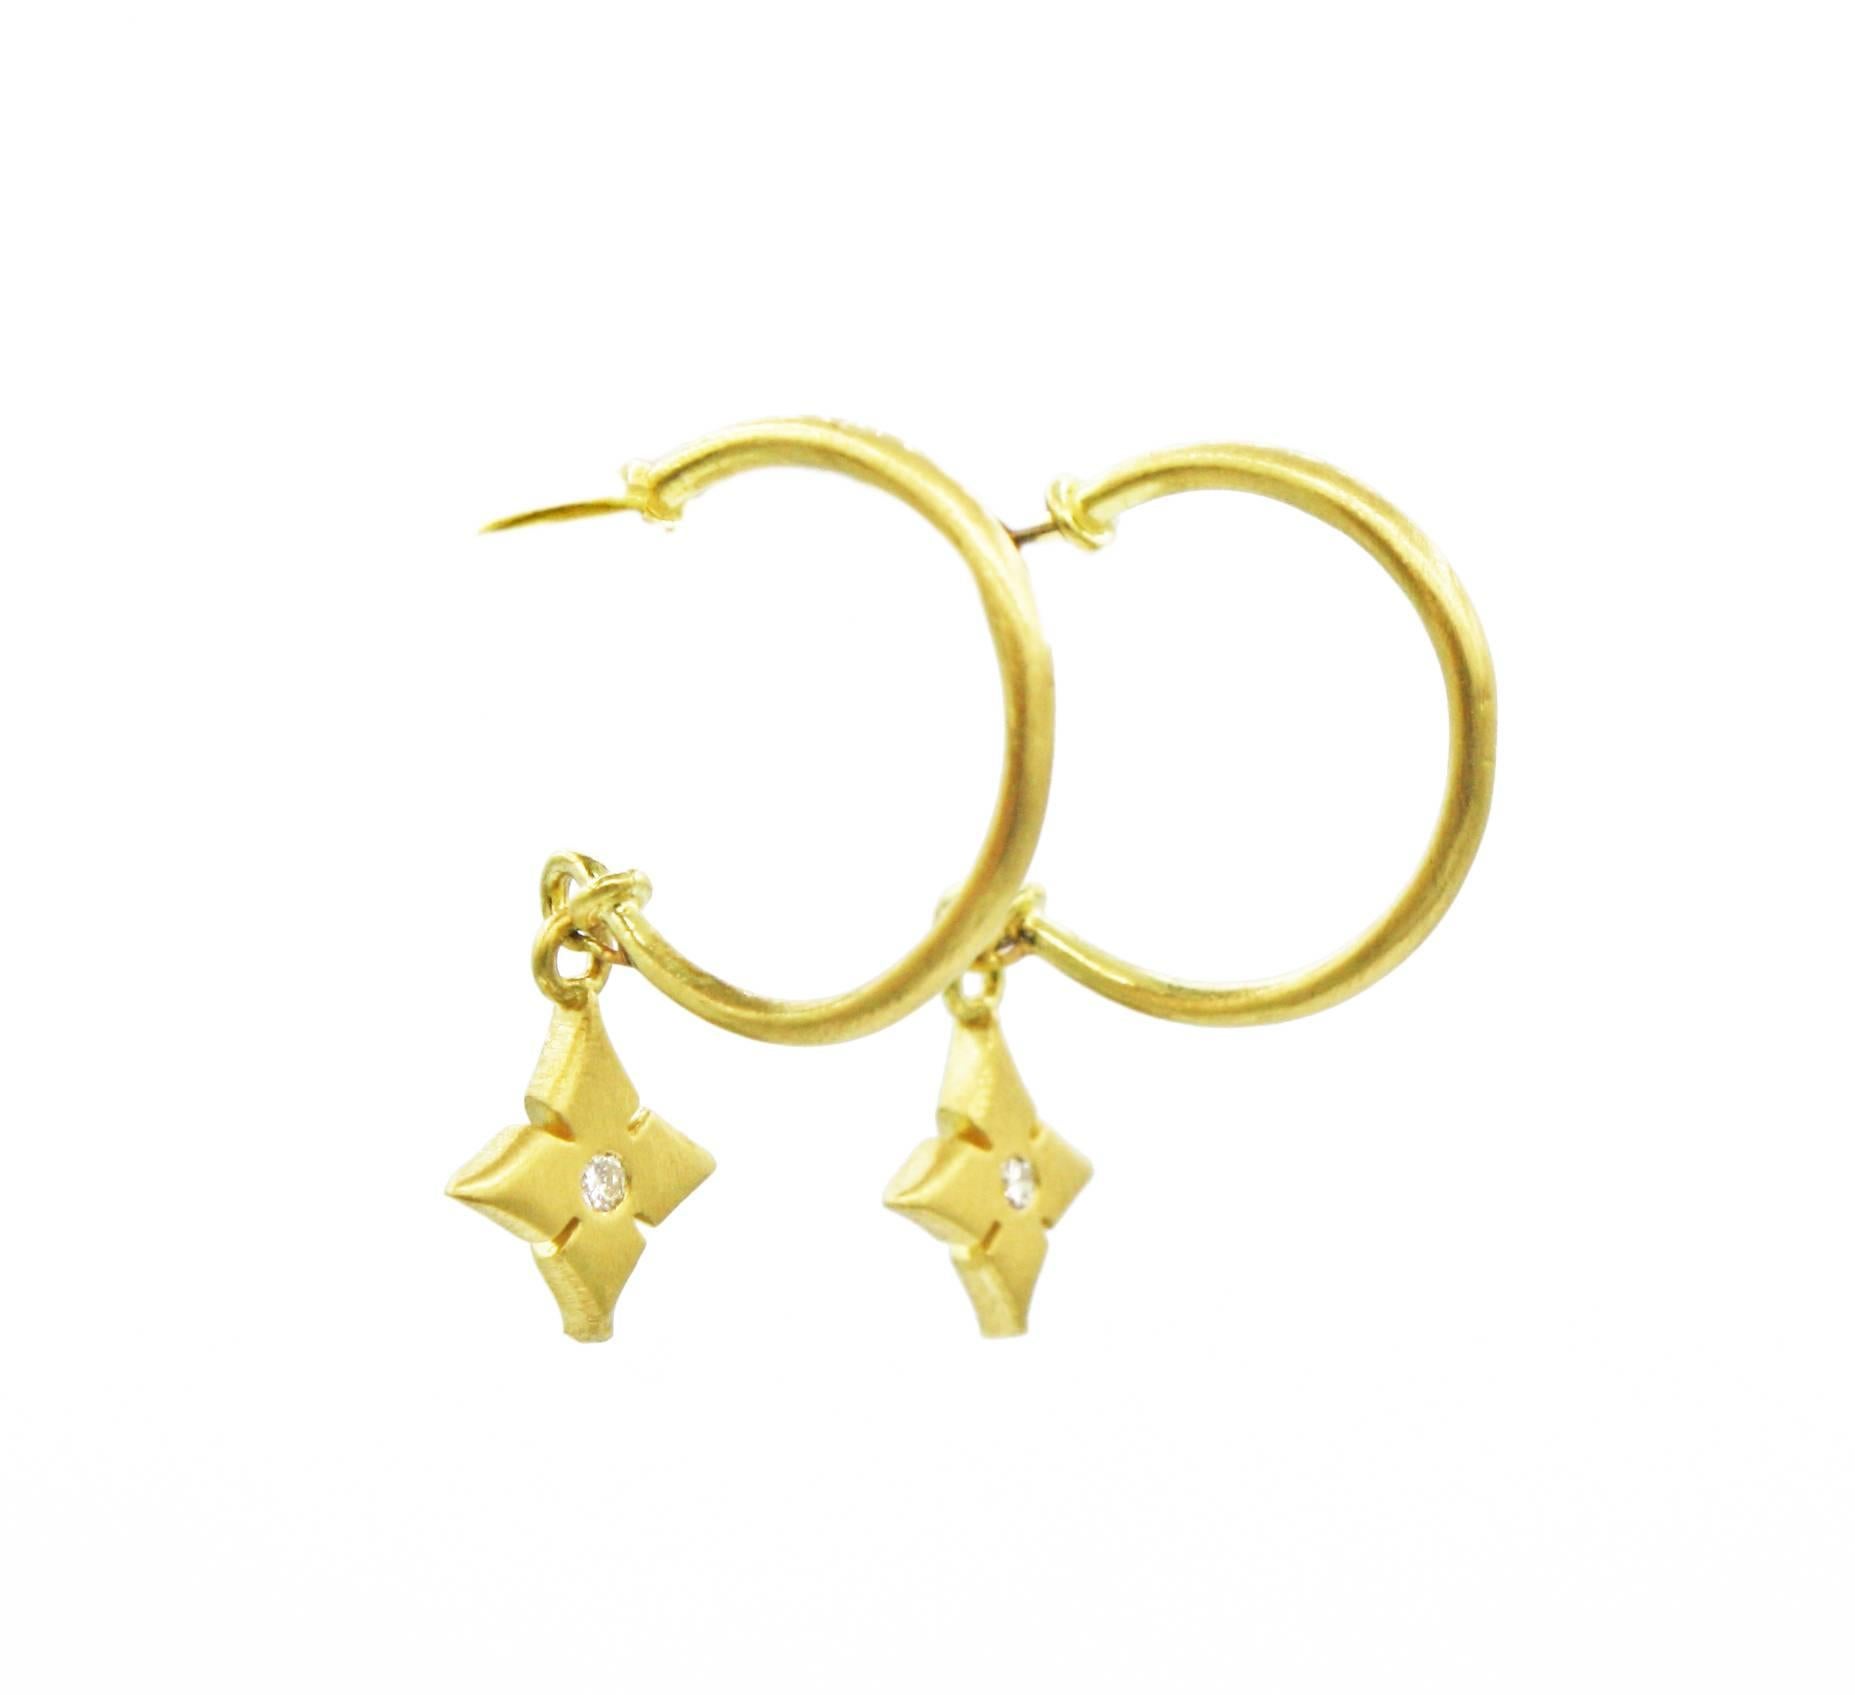 These delicate hoop earrings are from Renato Cipullo's 